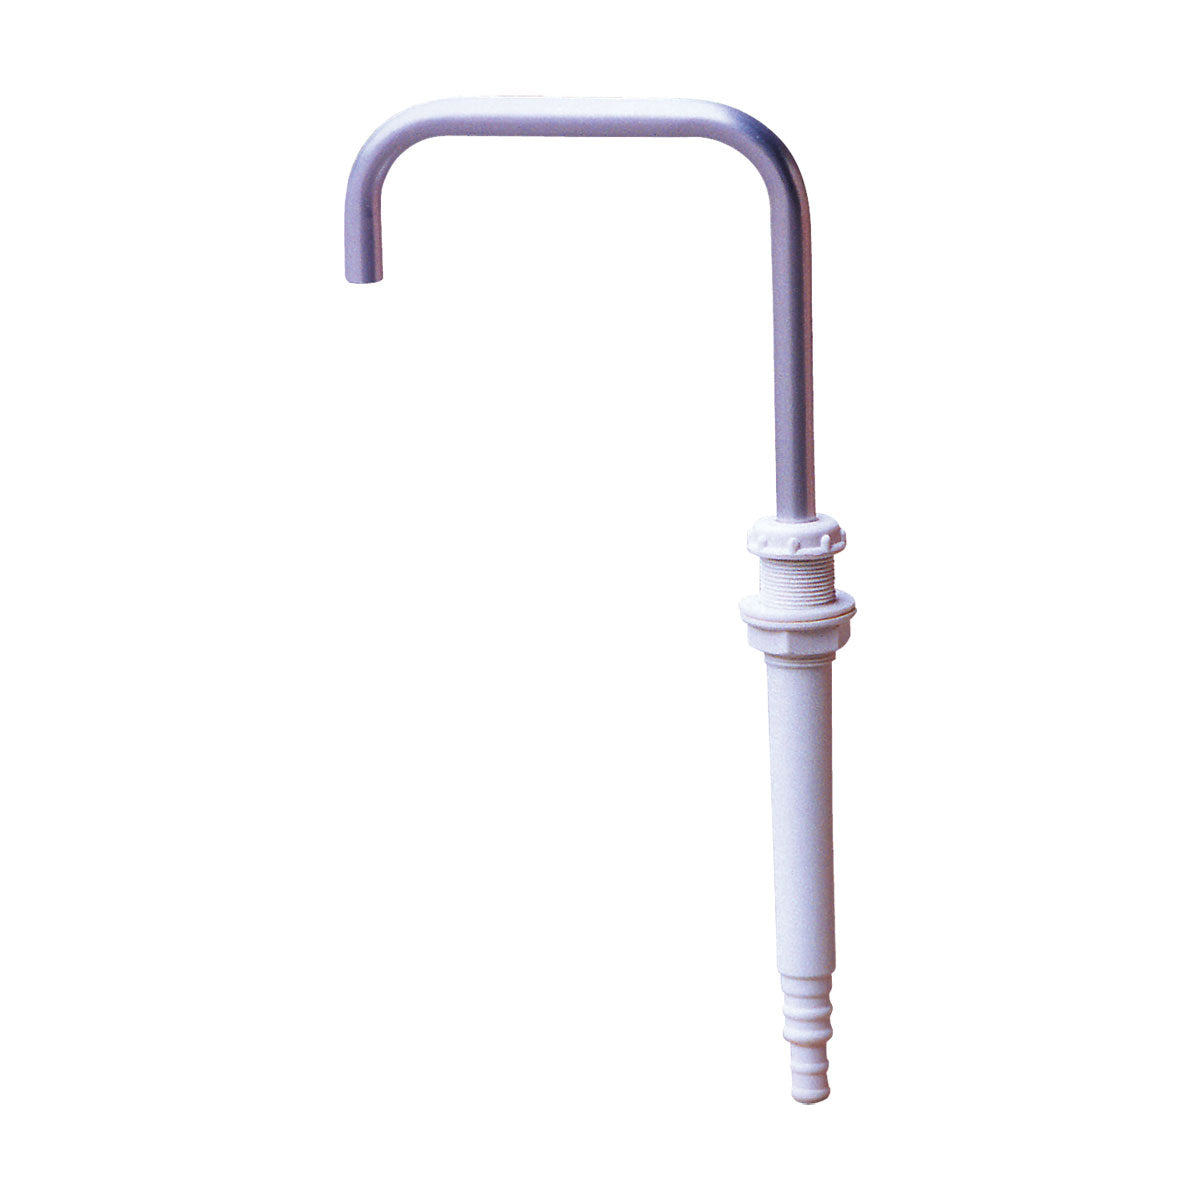 Whale® Tuckaway and Telescopic Faucets